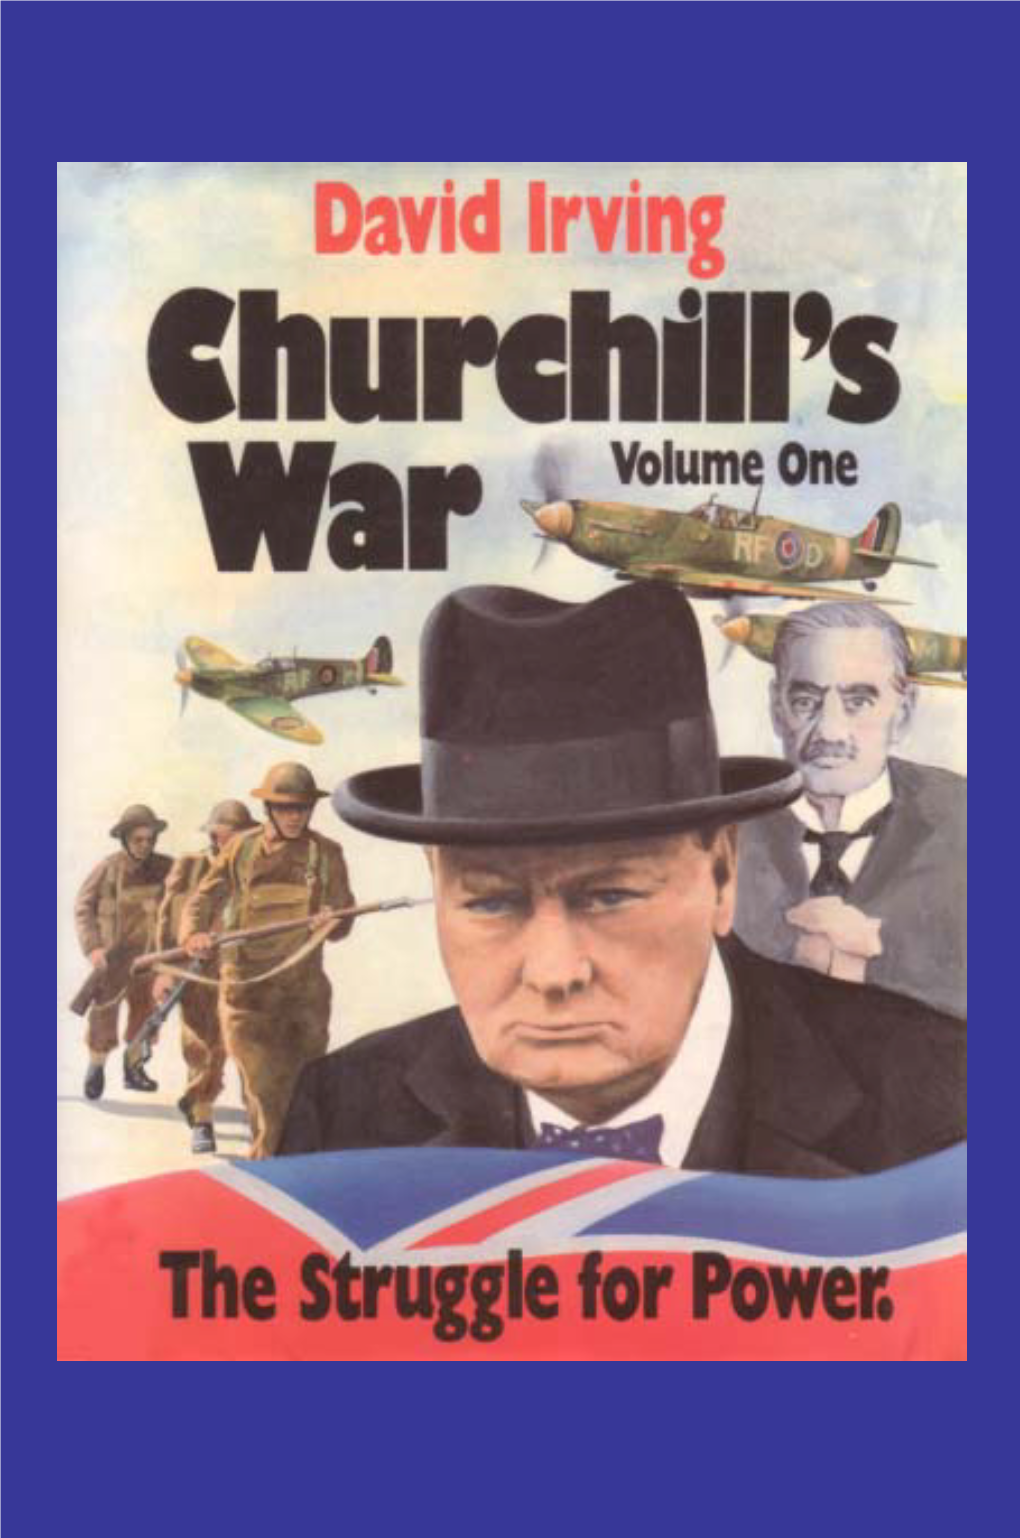 CHURCHILL's WAR Is a Series of Volumes on the Life of the British Statesman